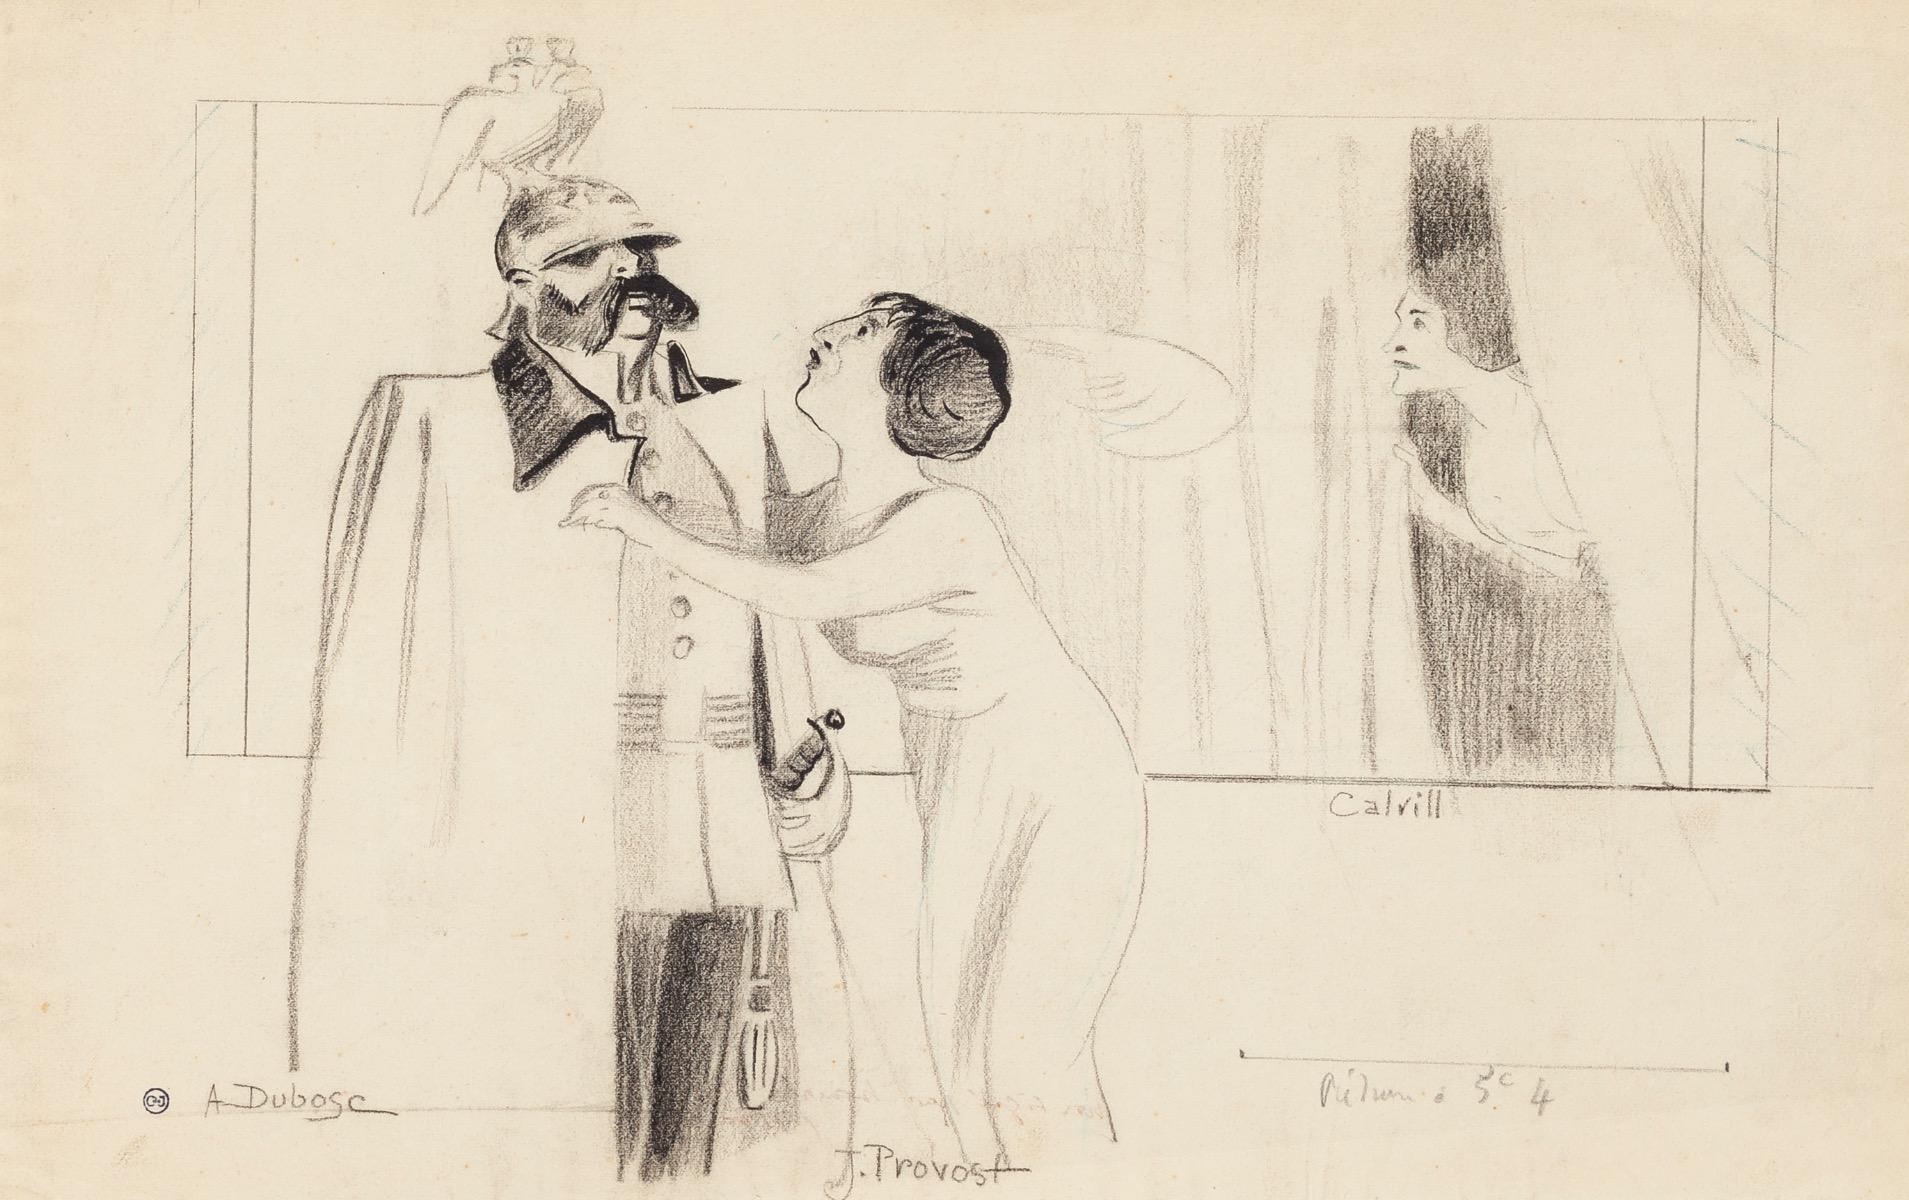 Theatrical Scene is an original drawing in pencil on paper realized by Maurice Lourdey (1860-1934)

Stamp on the lower right ""CJ"

Good conditions.

The drawing represents an interesting actors on stage, with their names written in pencil (A.